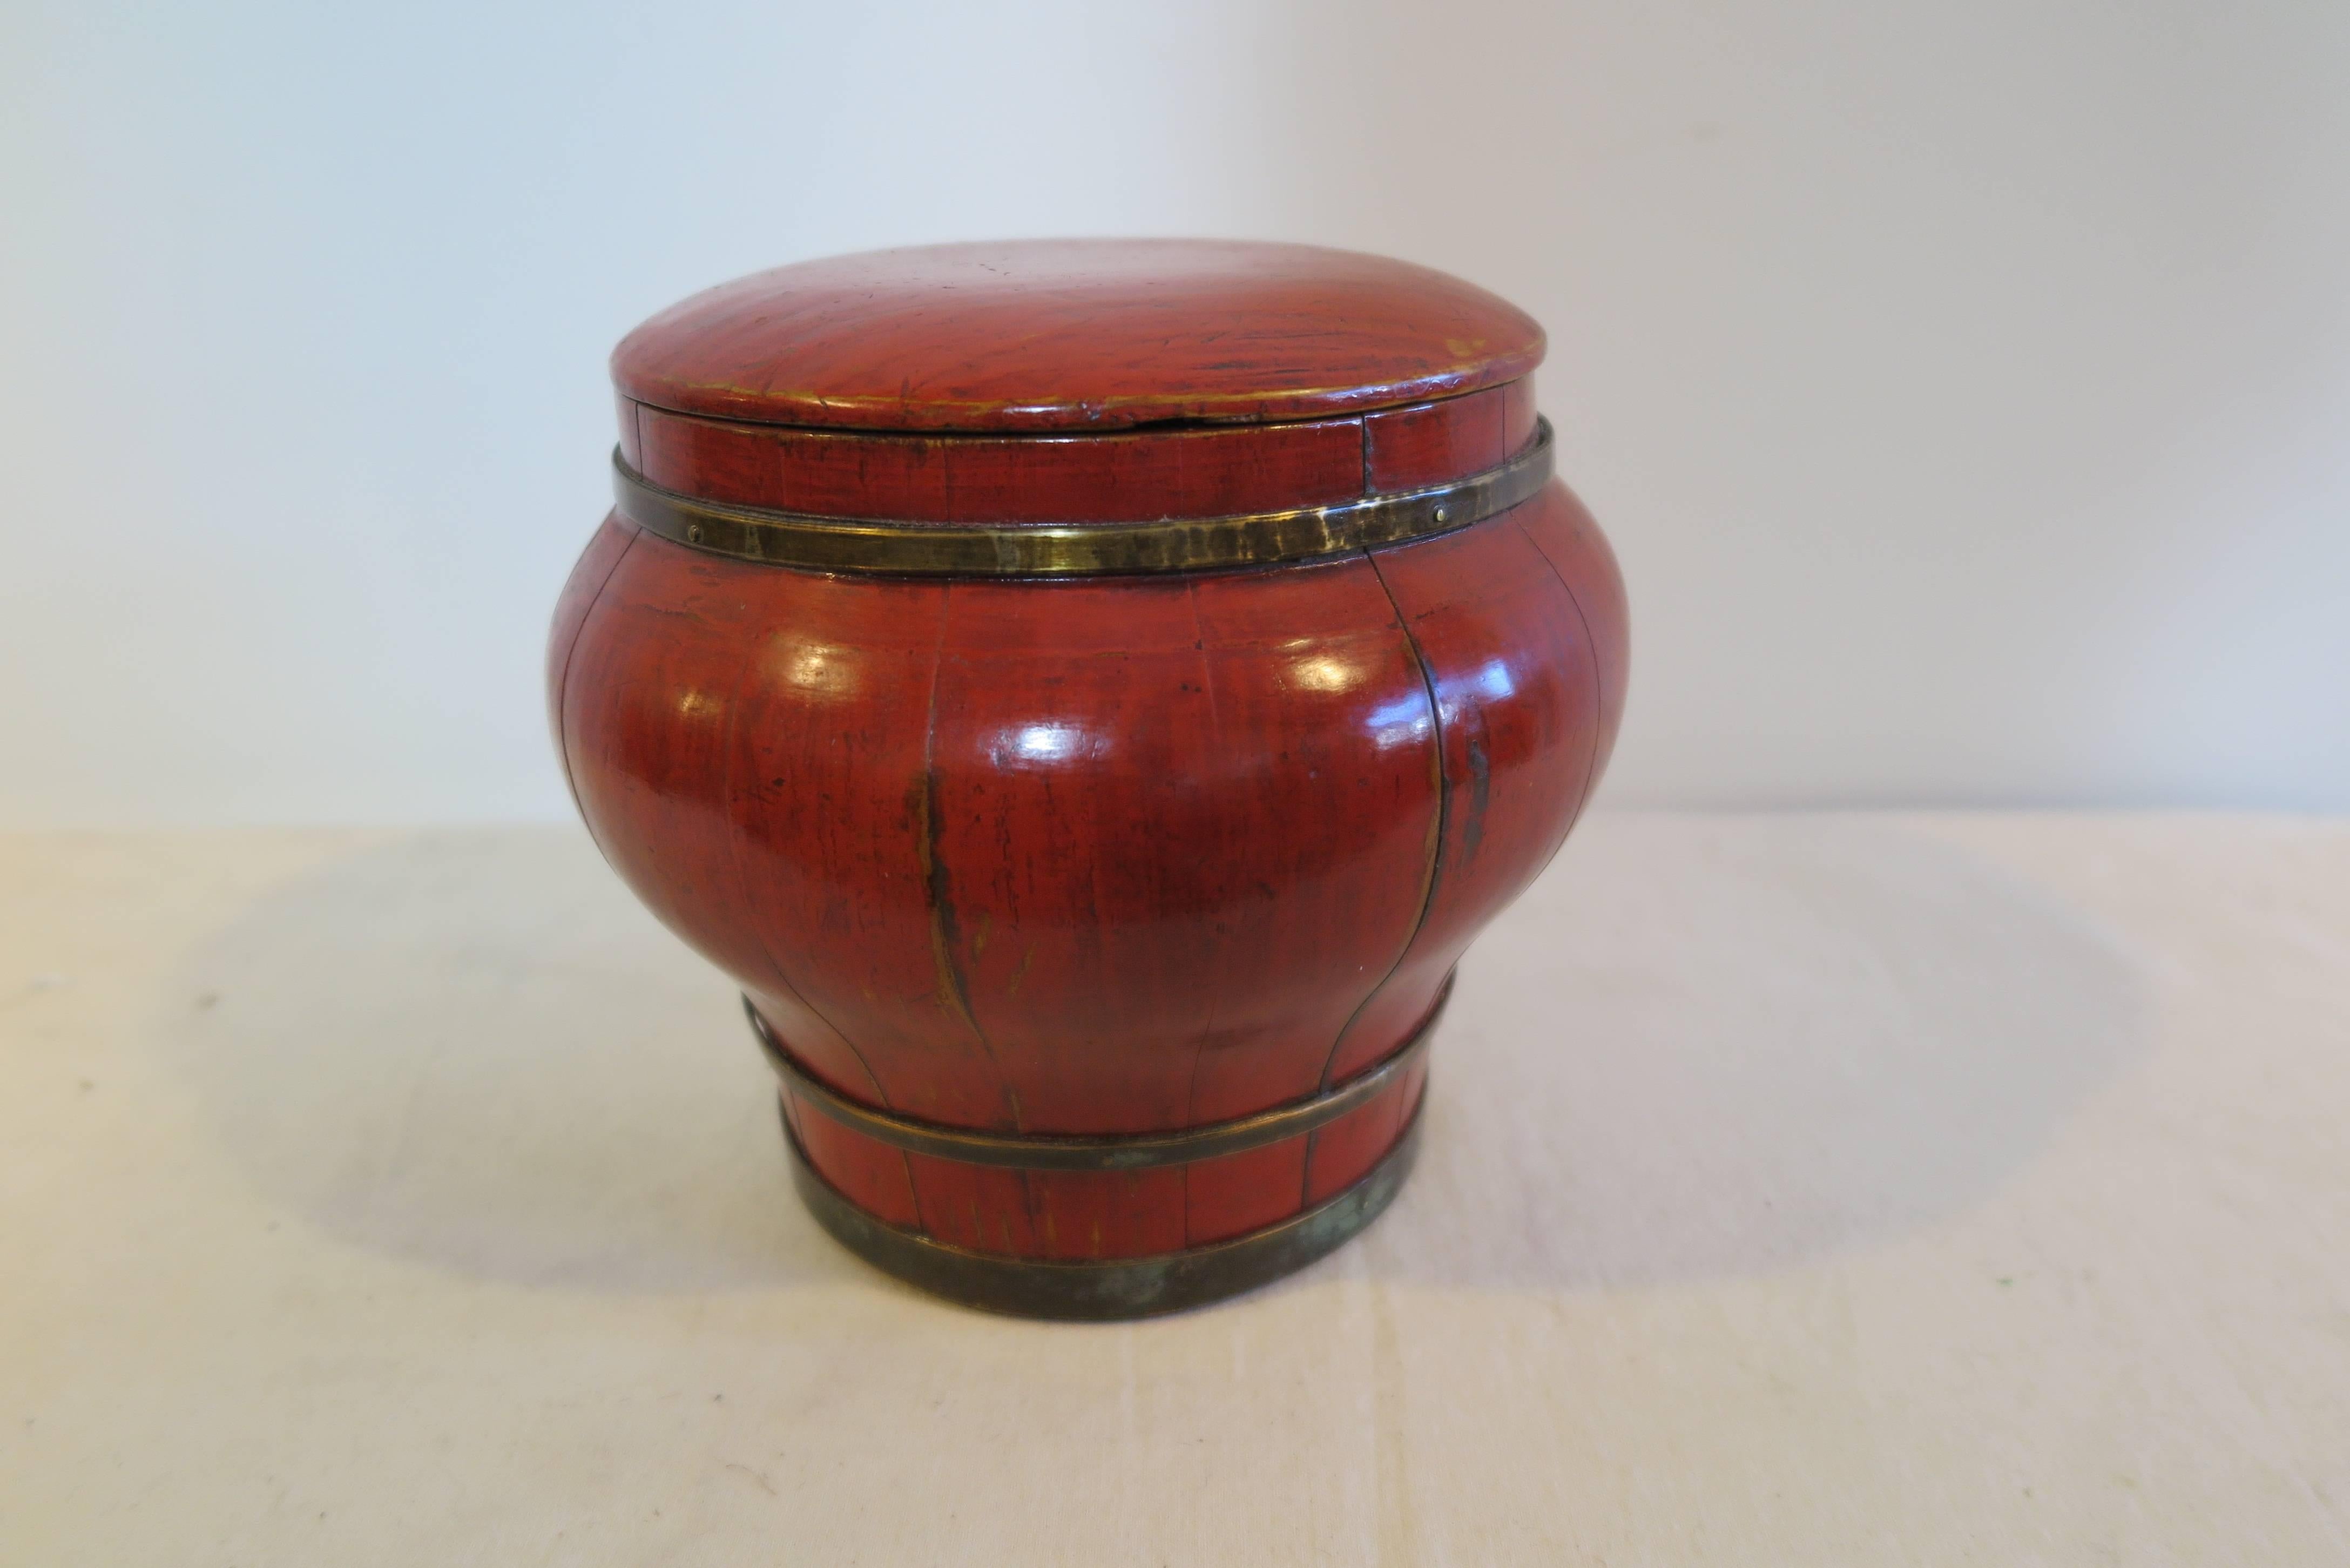 A 19th century Chinese wooden bowl with red lacquer and bronze banding. Solid pieces of wood sculpted into meticulously matching pieces that section together to create this wonderful curved round shape. The pieces of wood are held together by the